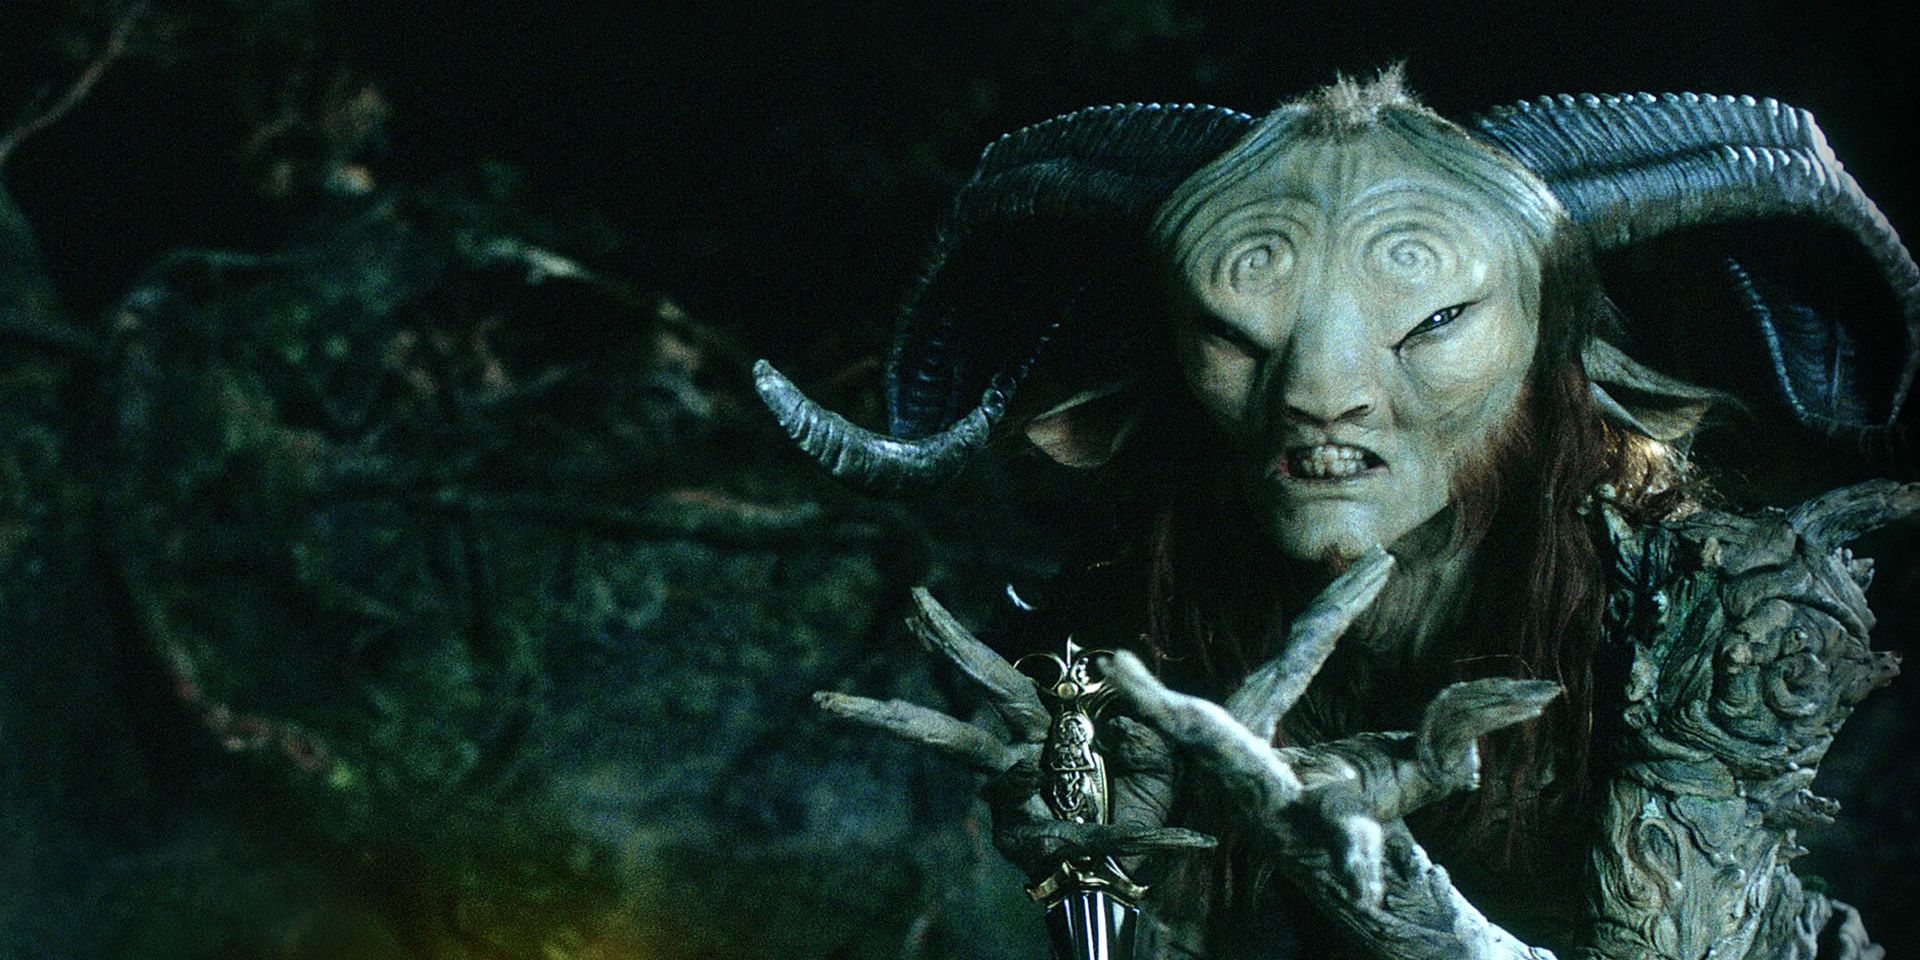 The titular character from the 2006 dark fantasy film Pan's Labyrinth.